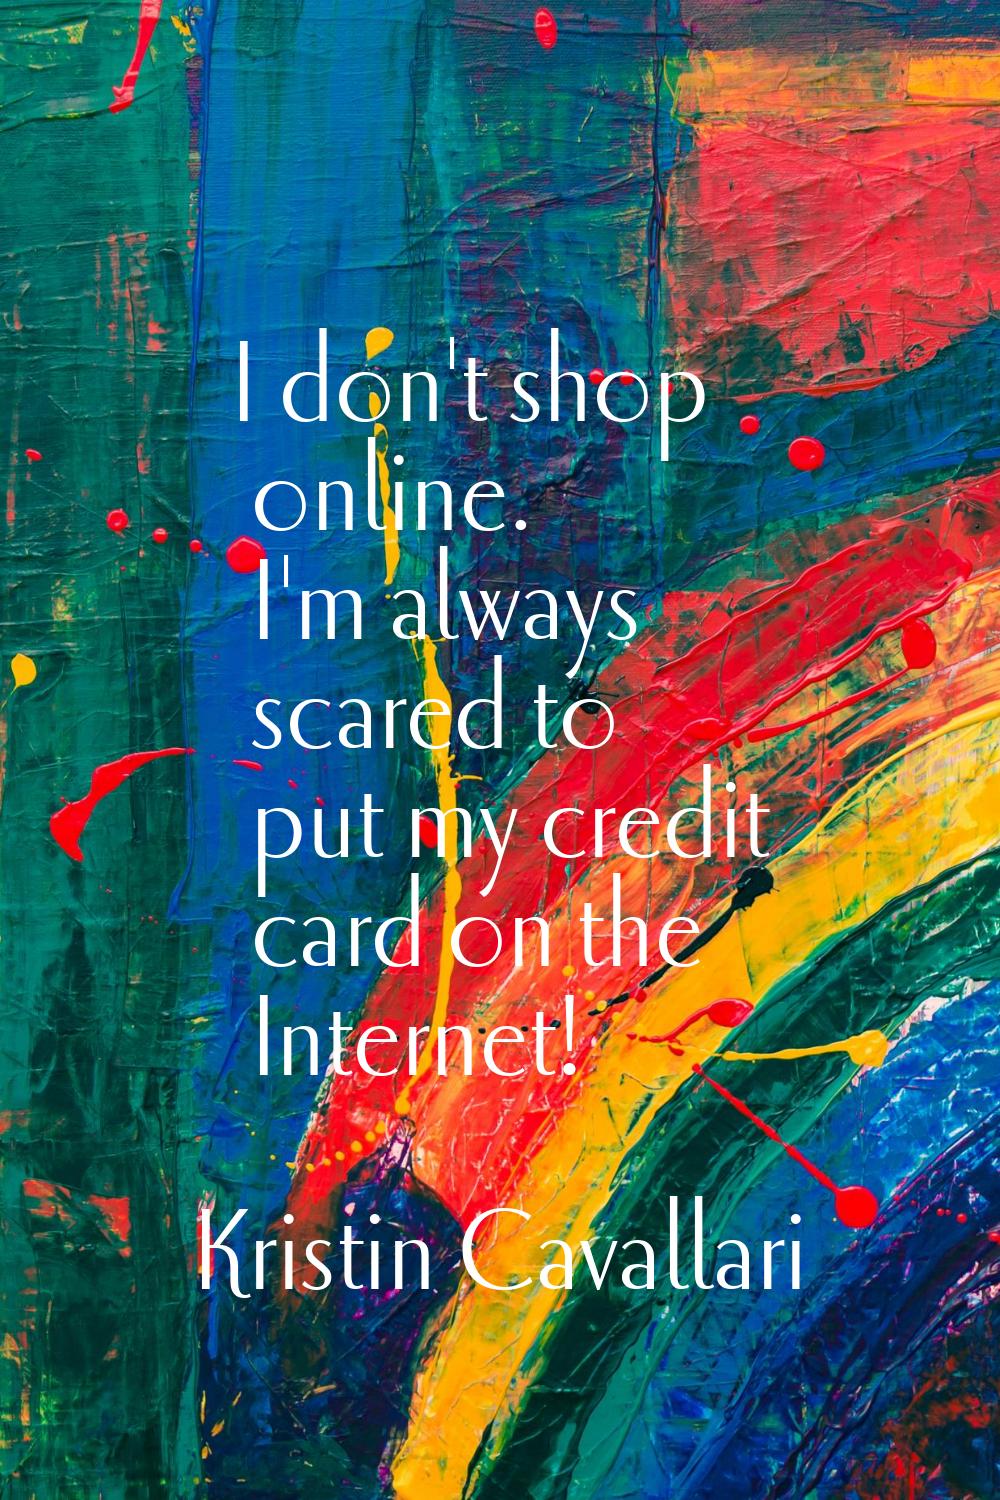 I don't shop online. I'm always scared to put my credit card on the Internet!